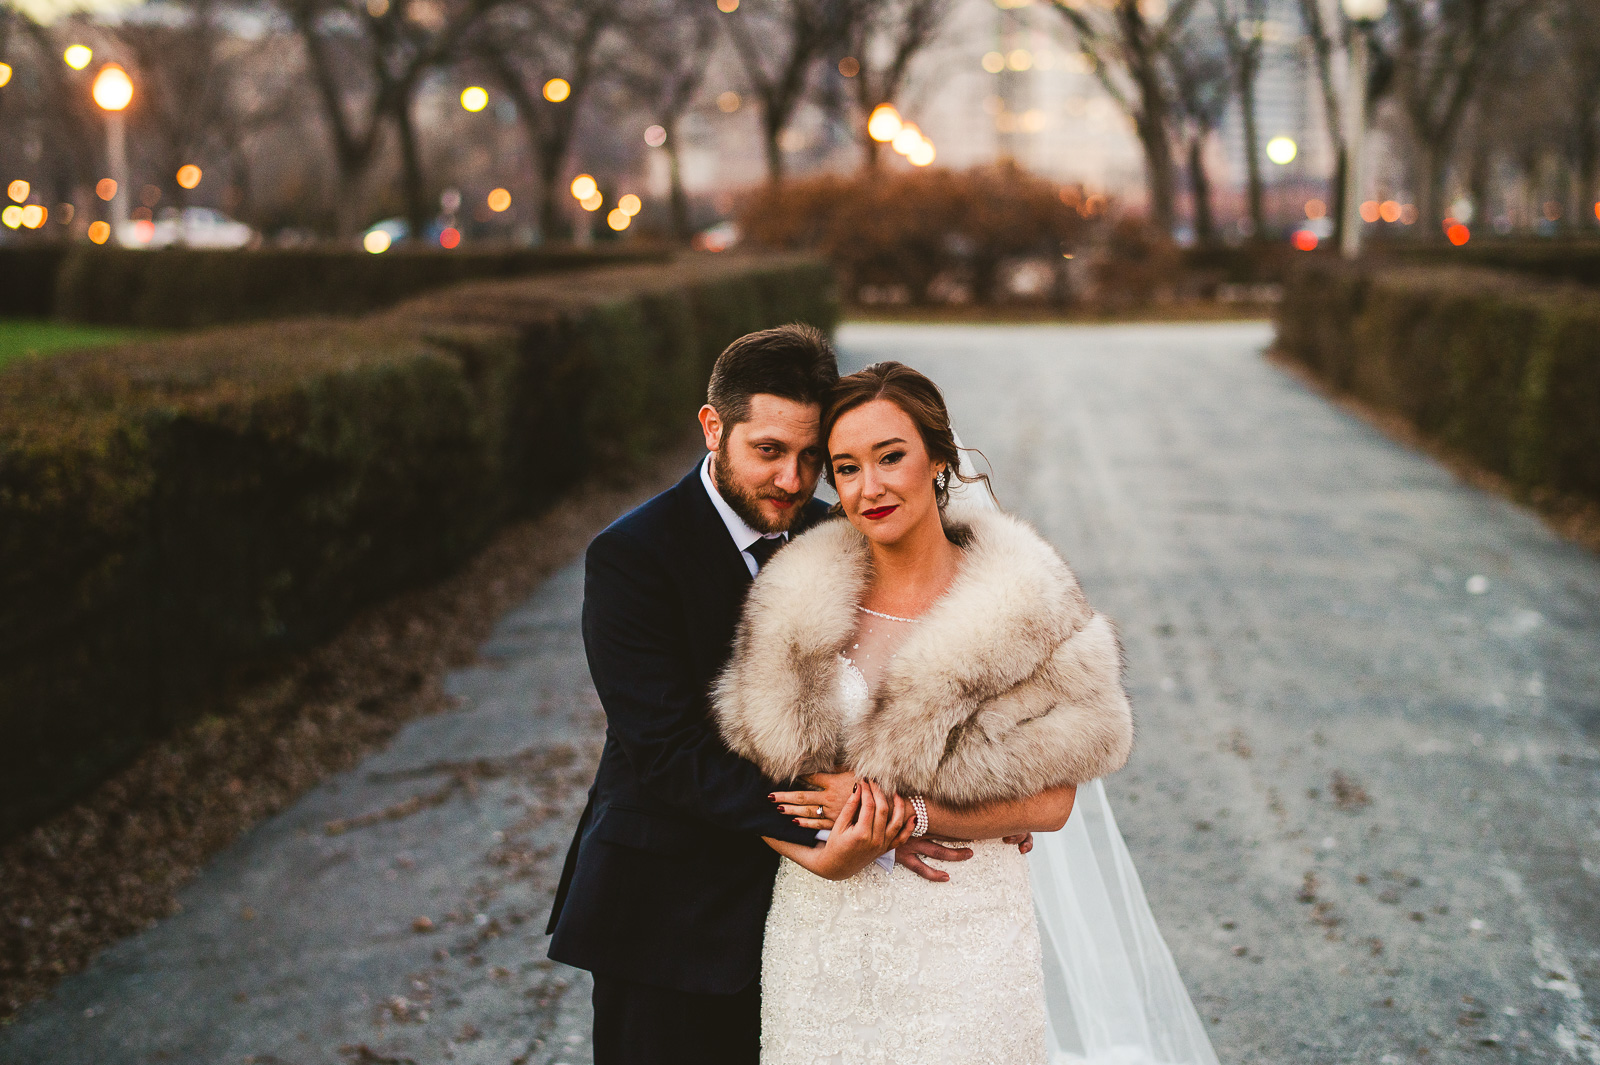 144 chicago wedding photographer best portraits during weddings review - 2018 in Review // My Favorite Chicago Wedding Photography Portraits